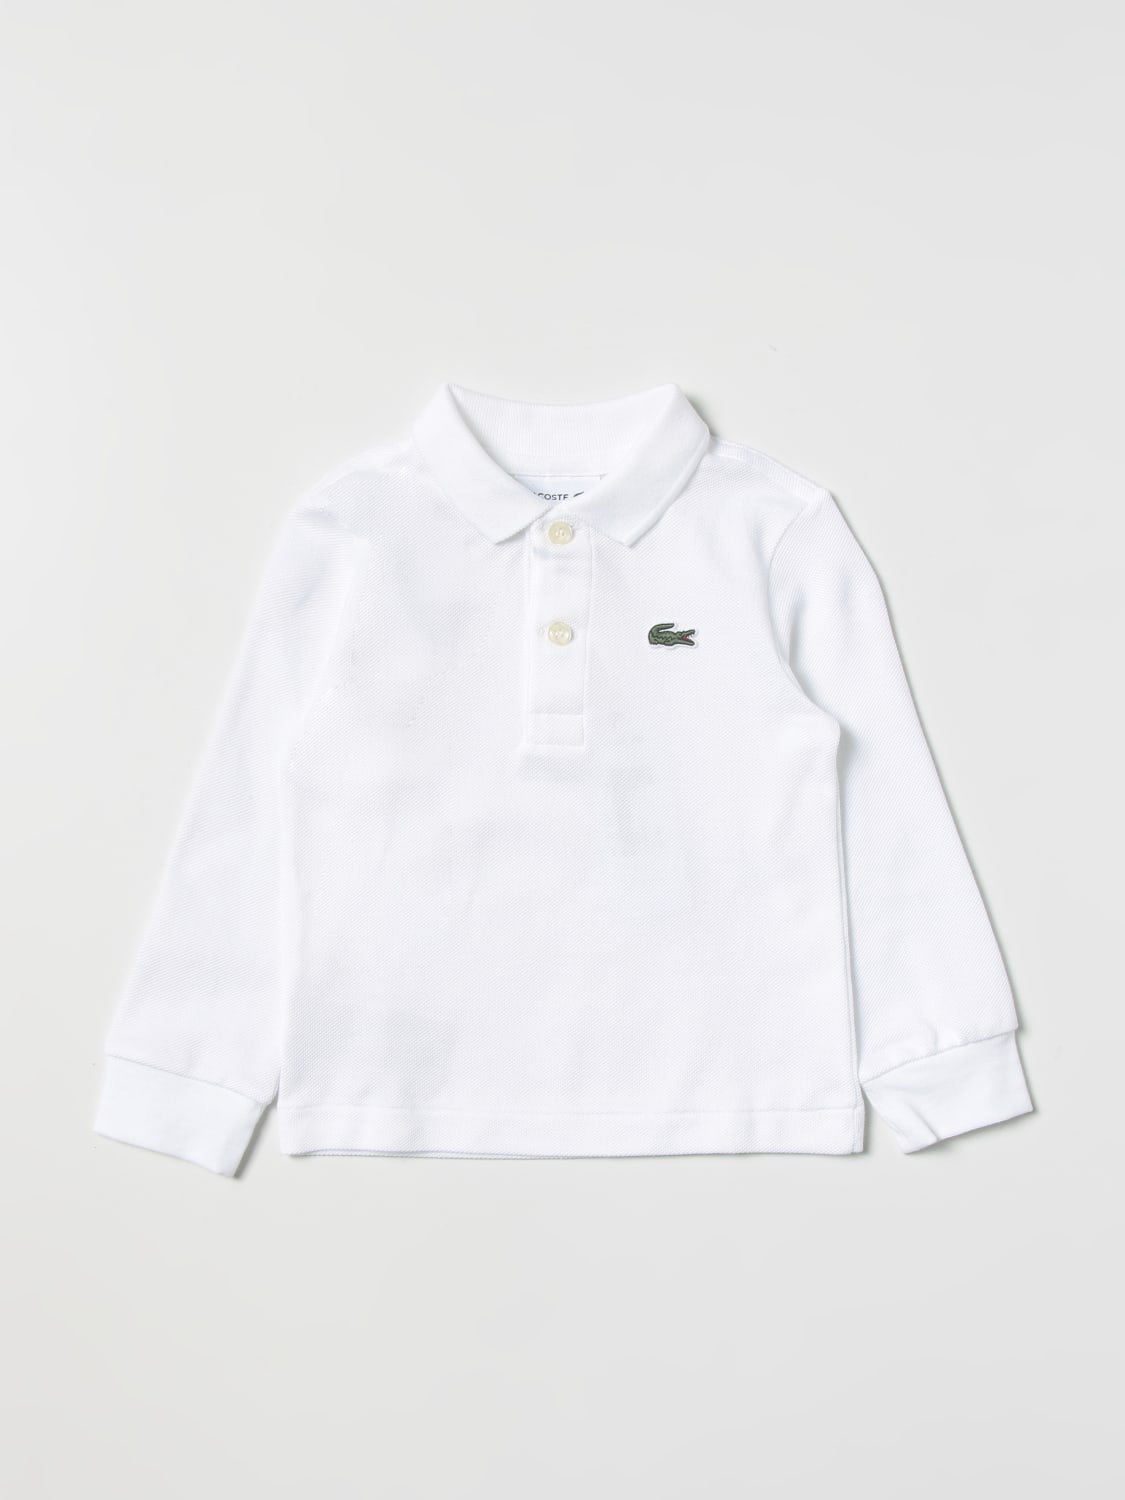 Guggenheim Museum nuance Ideelt LACOSTE: polo shirt for boys - White | Lacoste polo shirt PJ8915 online on  GIGLIO.COM